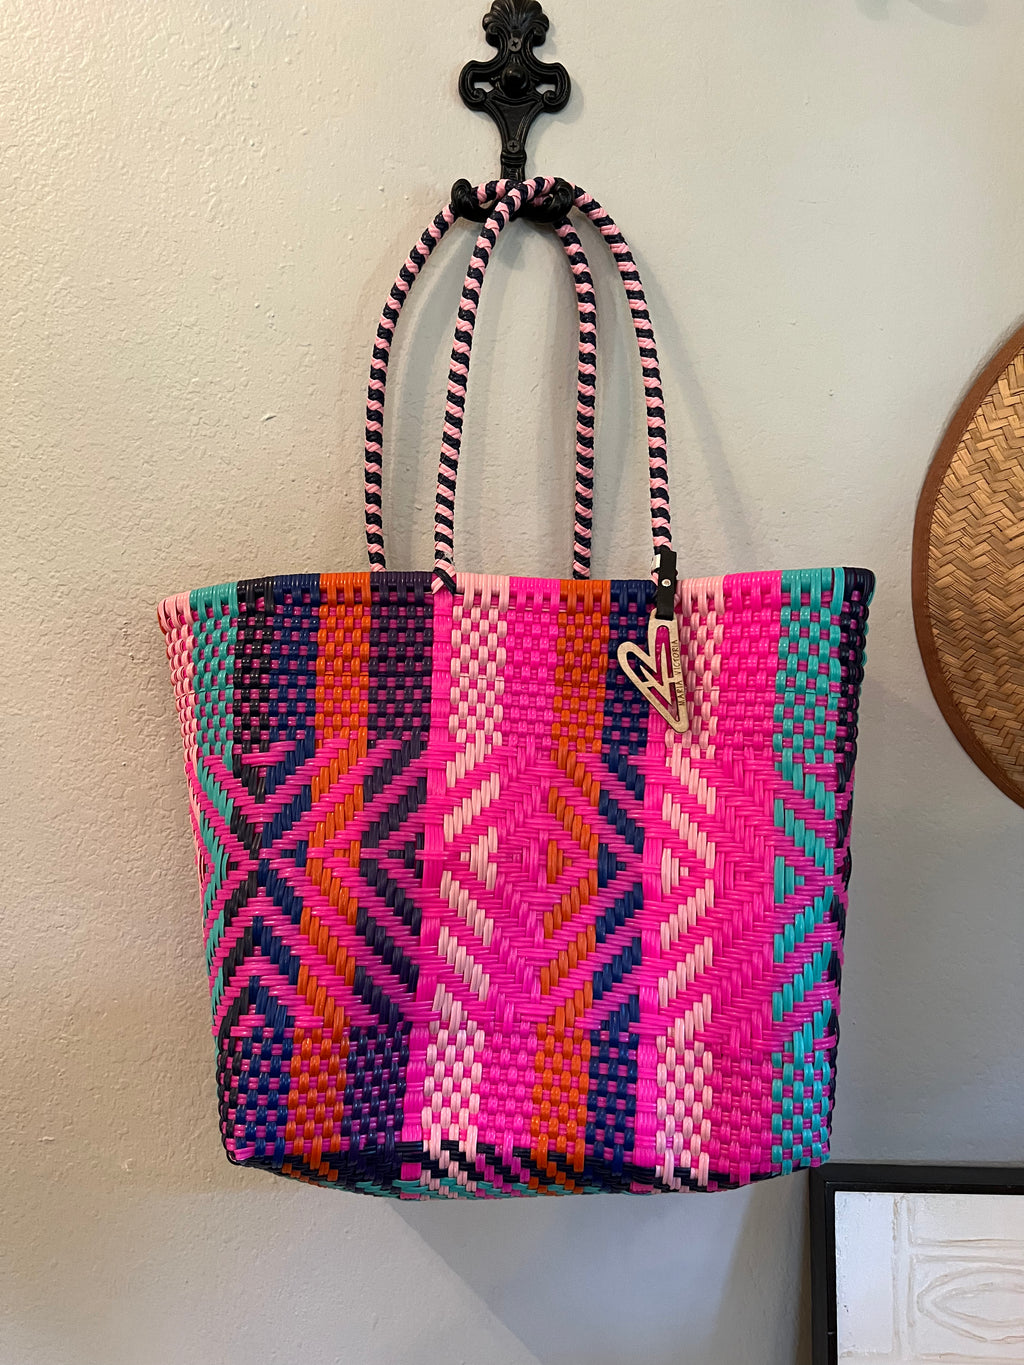 Multicolor Tote, Hot Pink with Light Teal, Light Pink, Navy and Orange Pattern (F110)